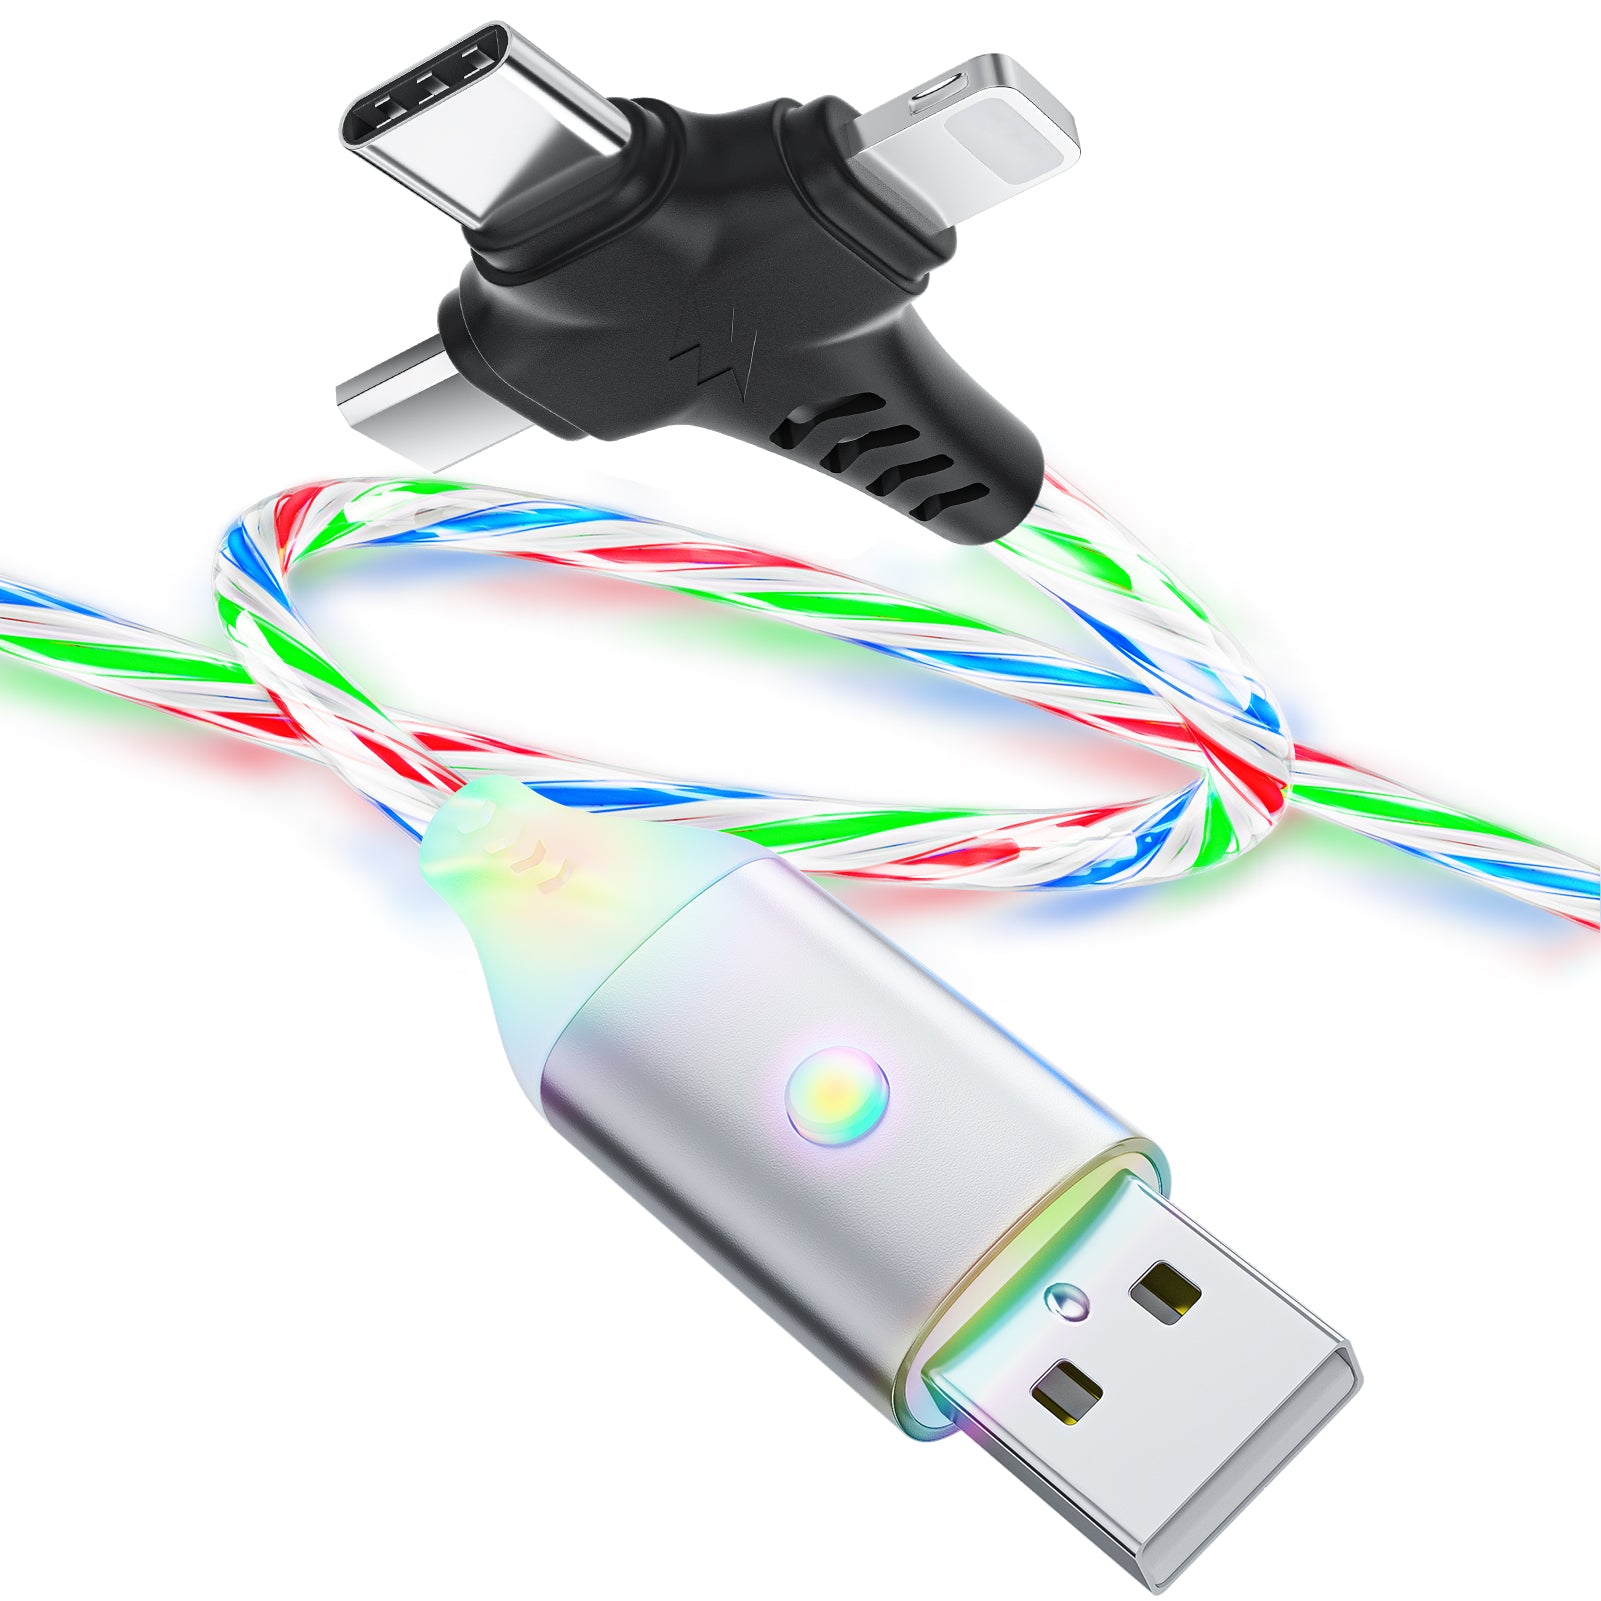 ORIbox 3 in 1 USB Cable, Power Off/On Visible LED Light Up Flowing Cha